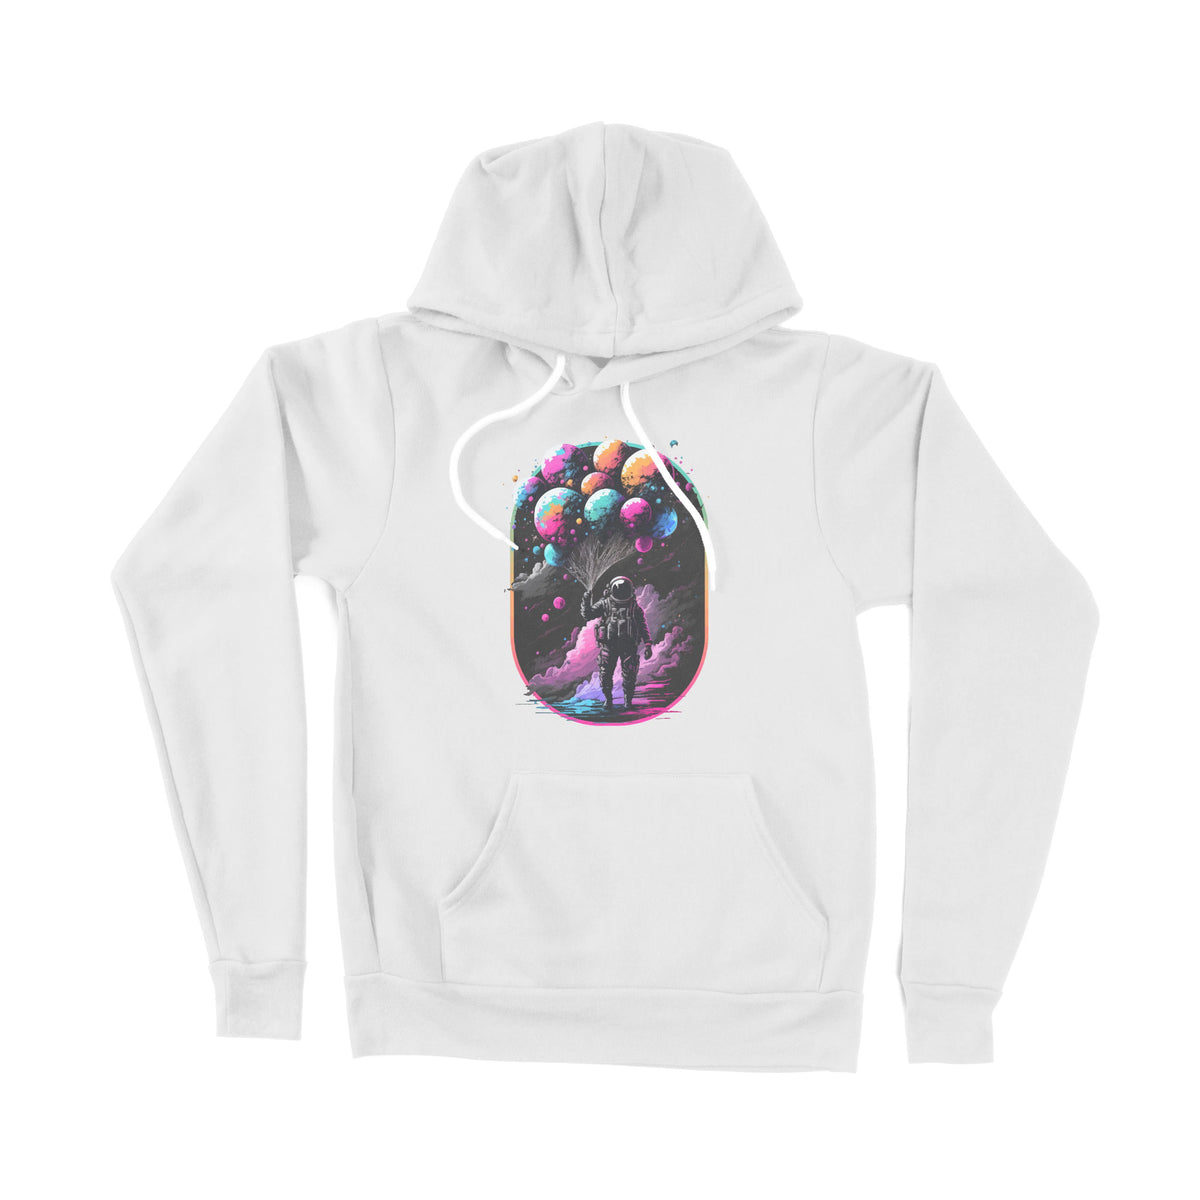 Astro Space Unisex Adult Pullover Hoodie Chroma Clothing